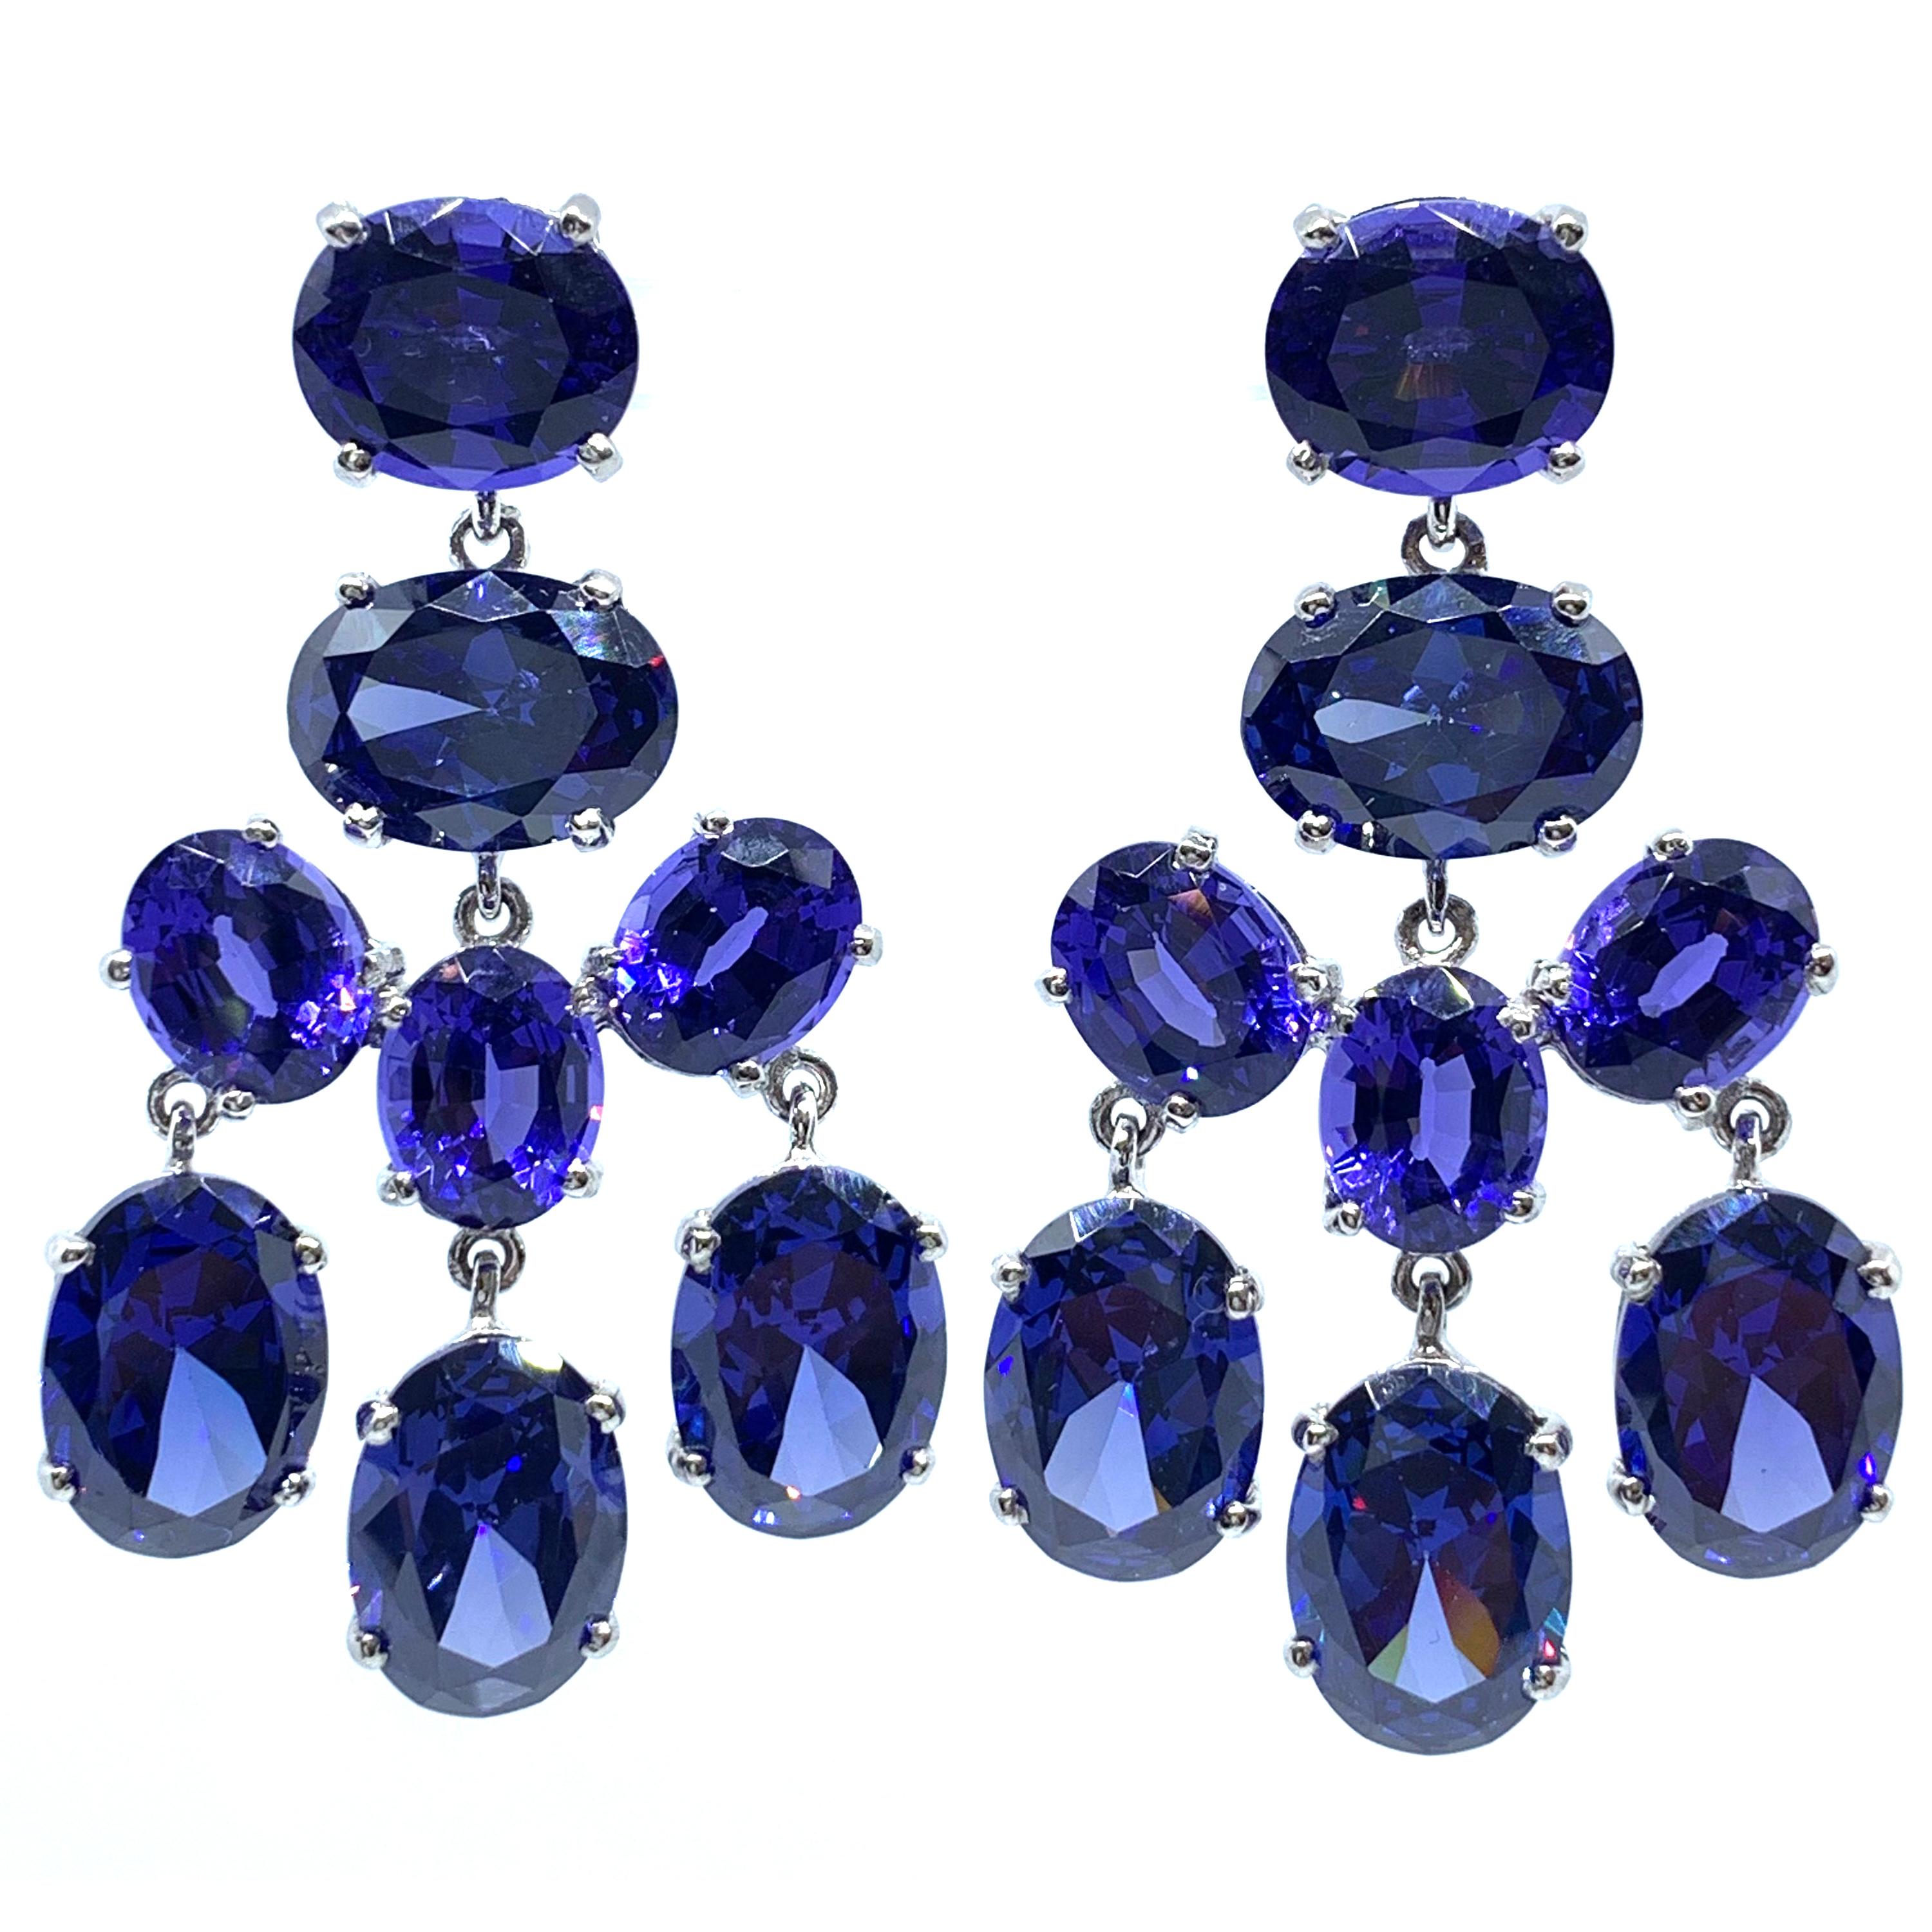 Show stopper! Jarin Lab-Sapphire and Tanzanite Chandelier Earrings

These stunning pair of chandelier earrings feature 16 pieces of oval lab-created sapphires and tanzanites. The stones are top quality, multi faceted, and highly reflective with rich